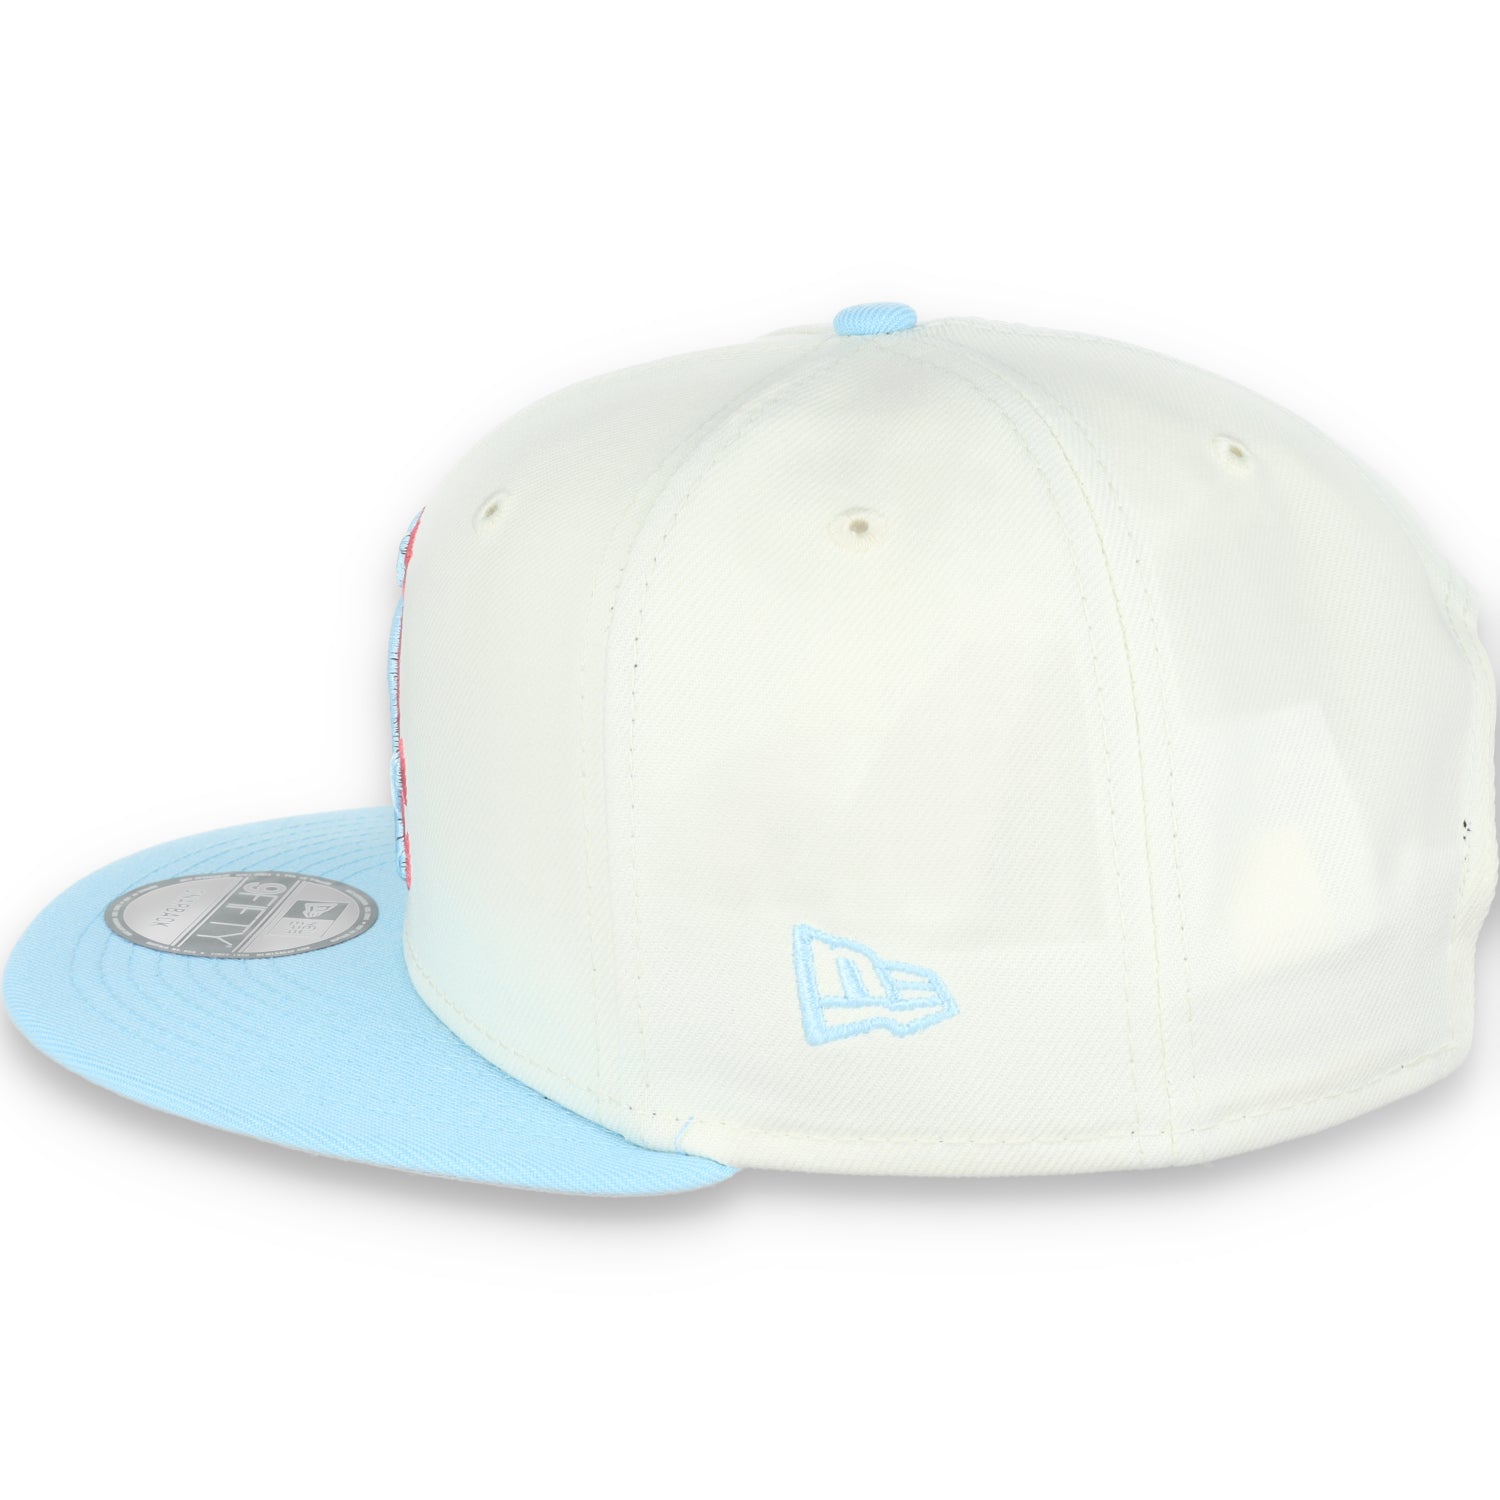 New Era Chicago White Sox 2-Tone Color Pack 9FIFTY Snapback Hat-Chrome/Baby Blue